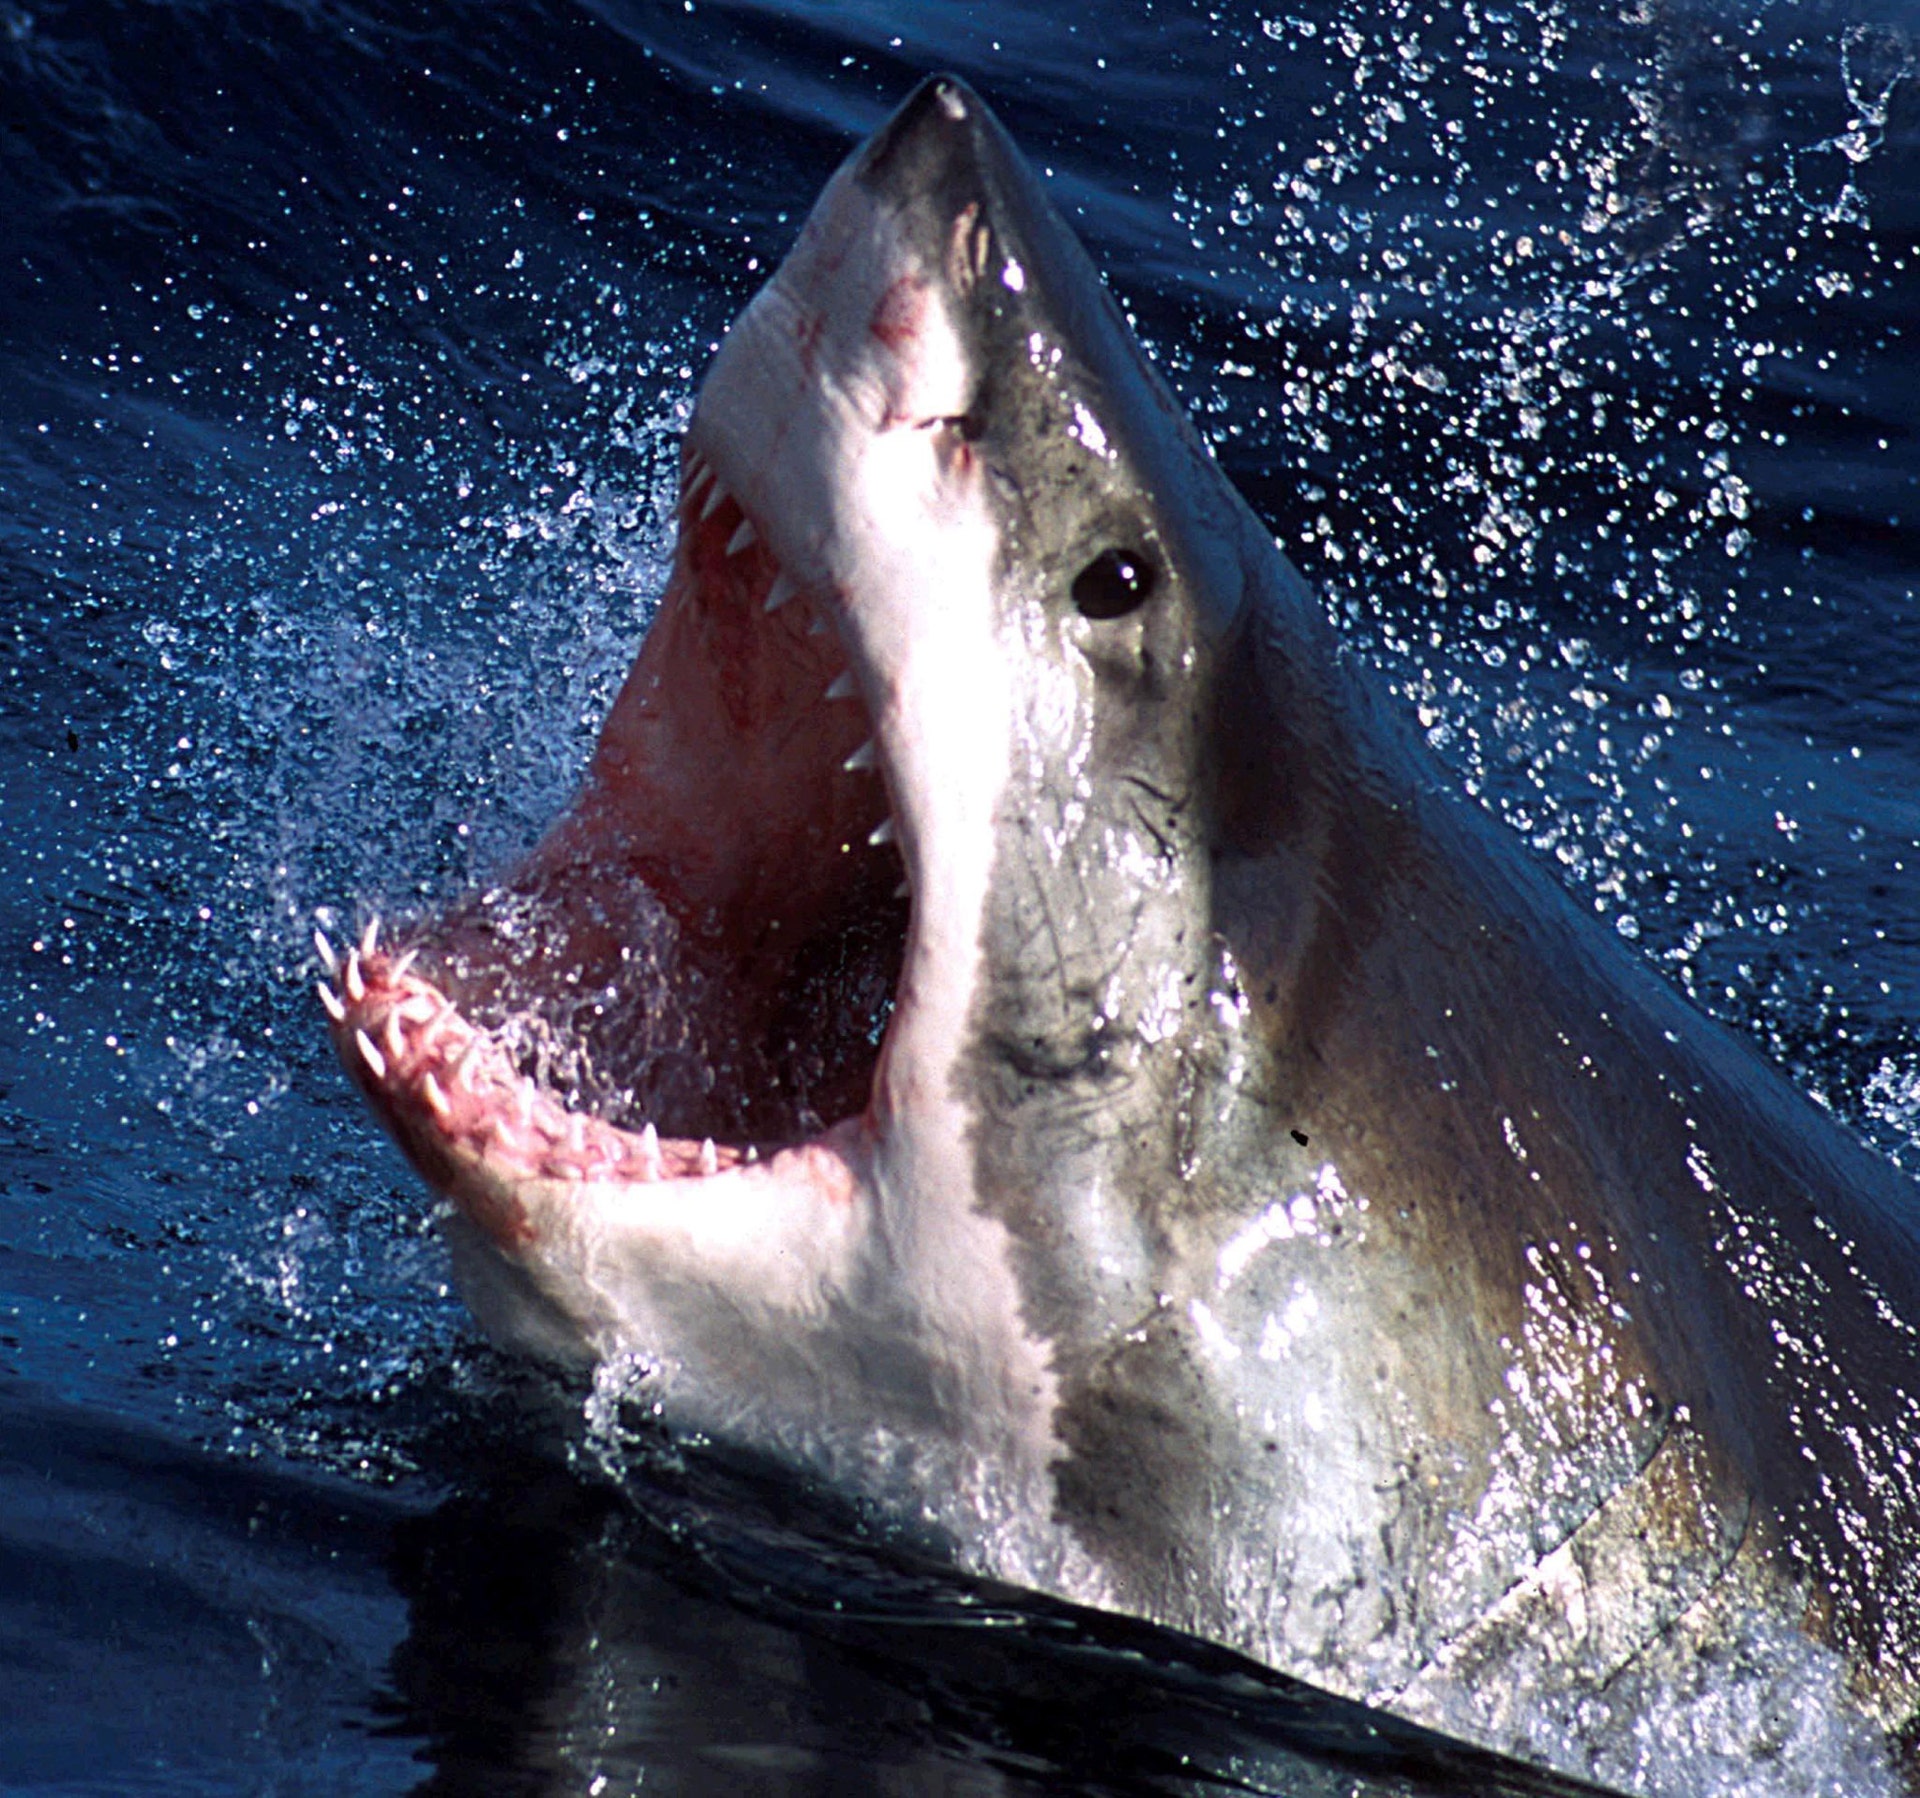 Jaws' spotted? Massive great white shark sighted off Australian coast